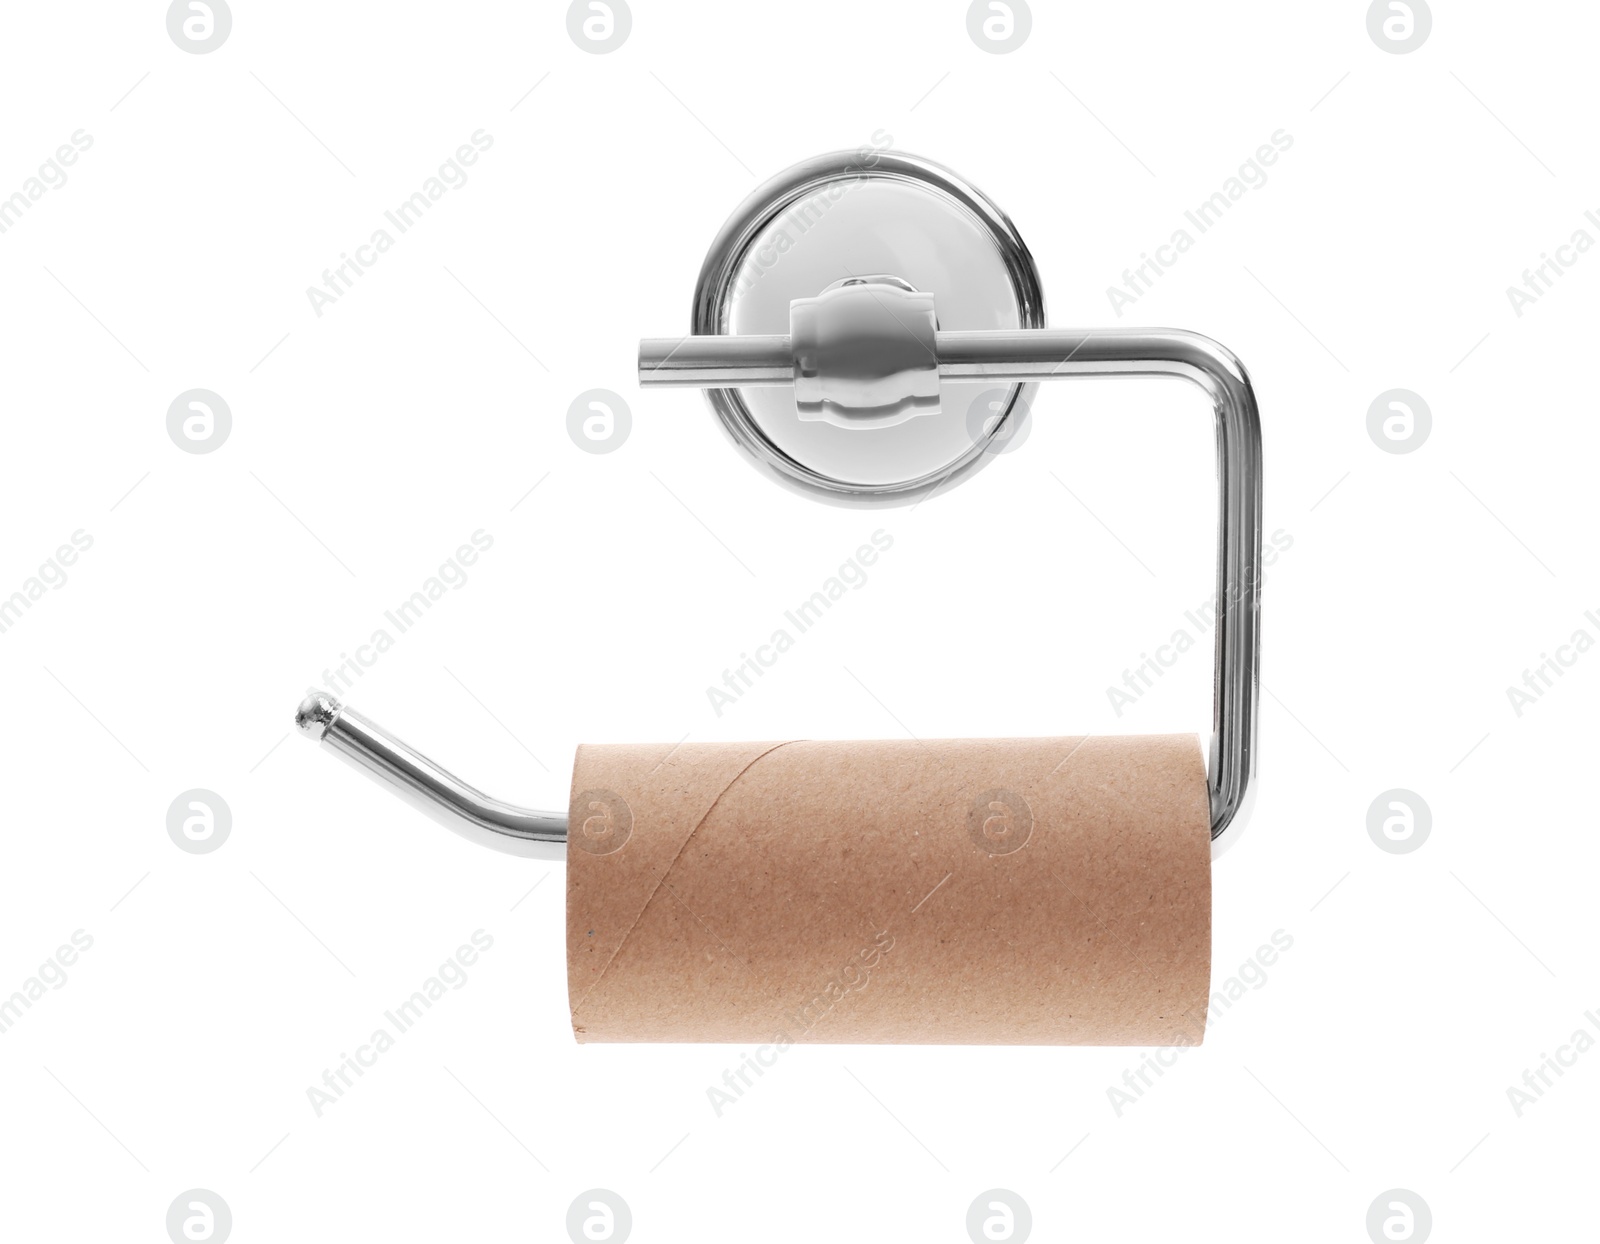 Photo of Holder with empty toilet paper roll on white background